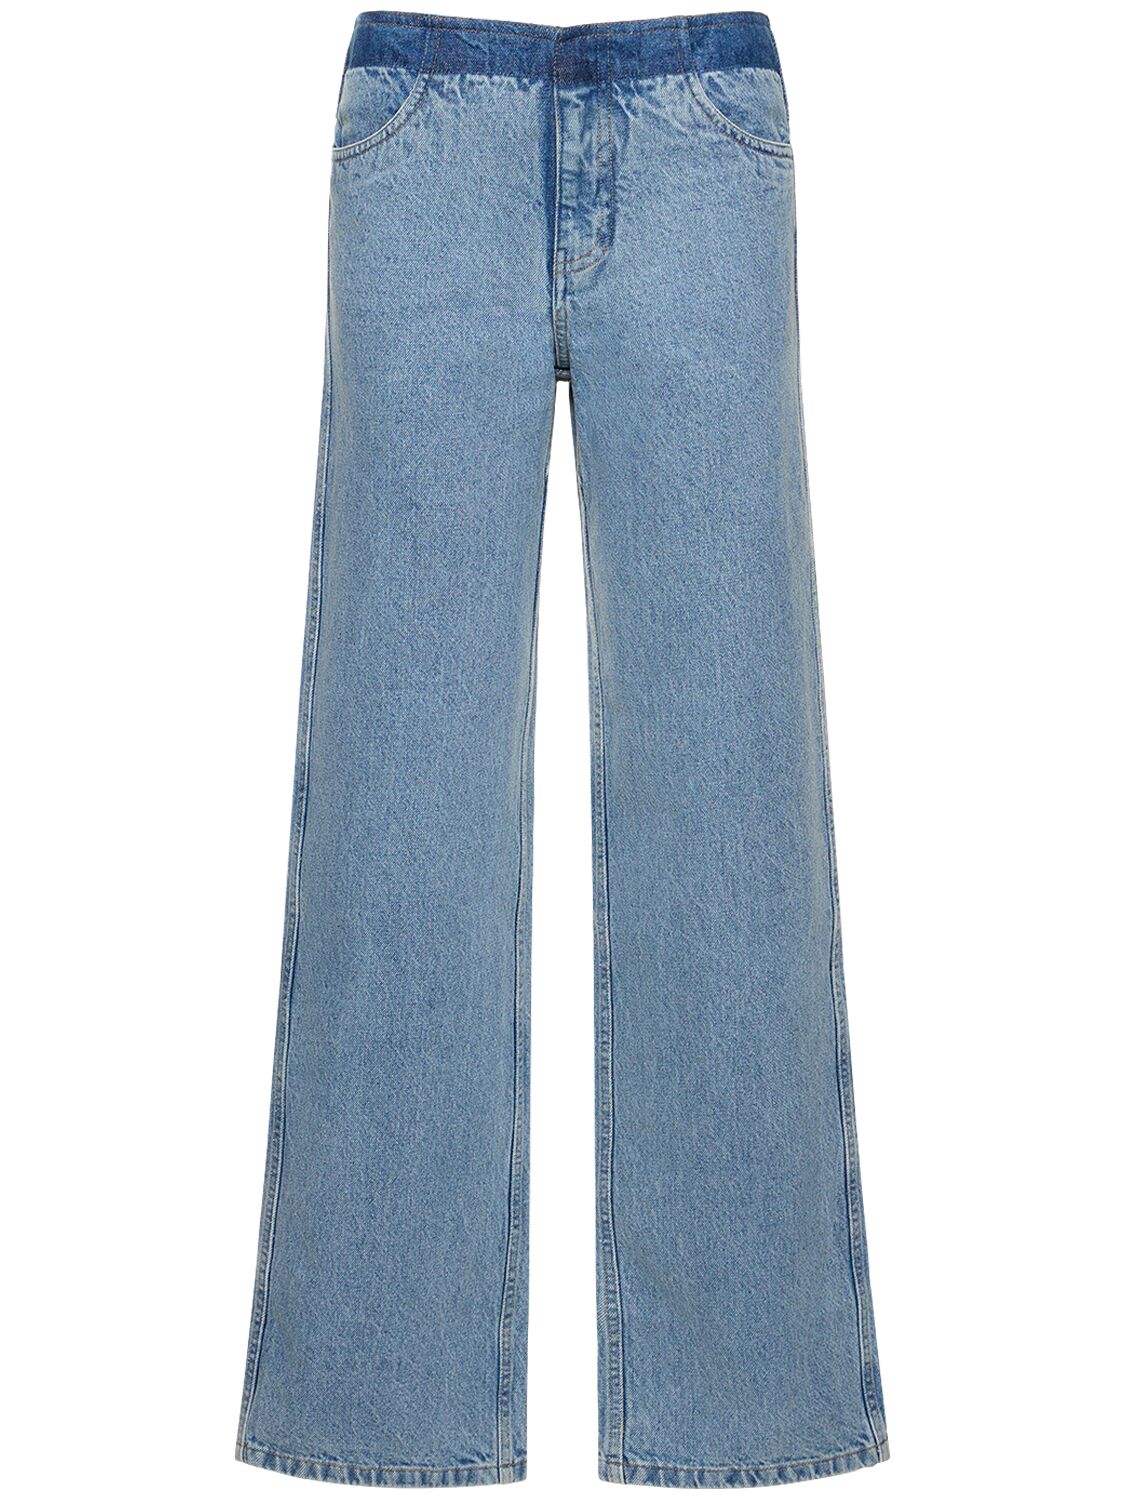 Image of Deconstruct Contrasting Color Jeans